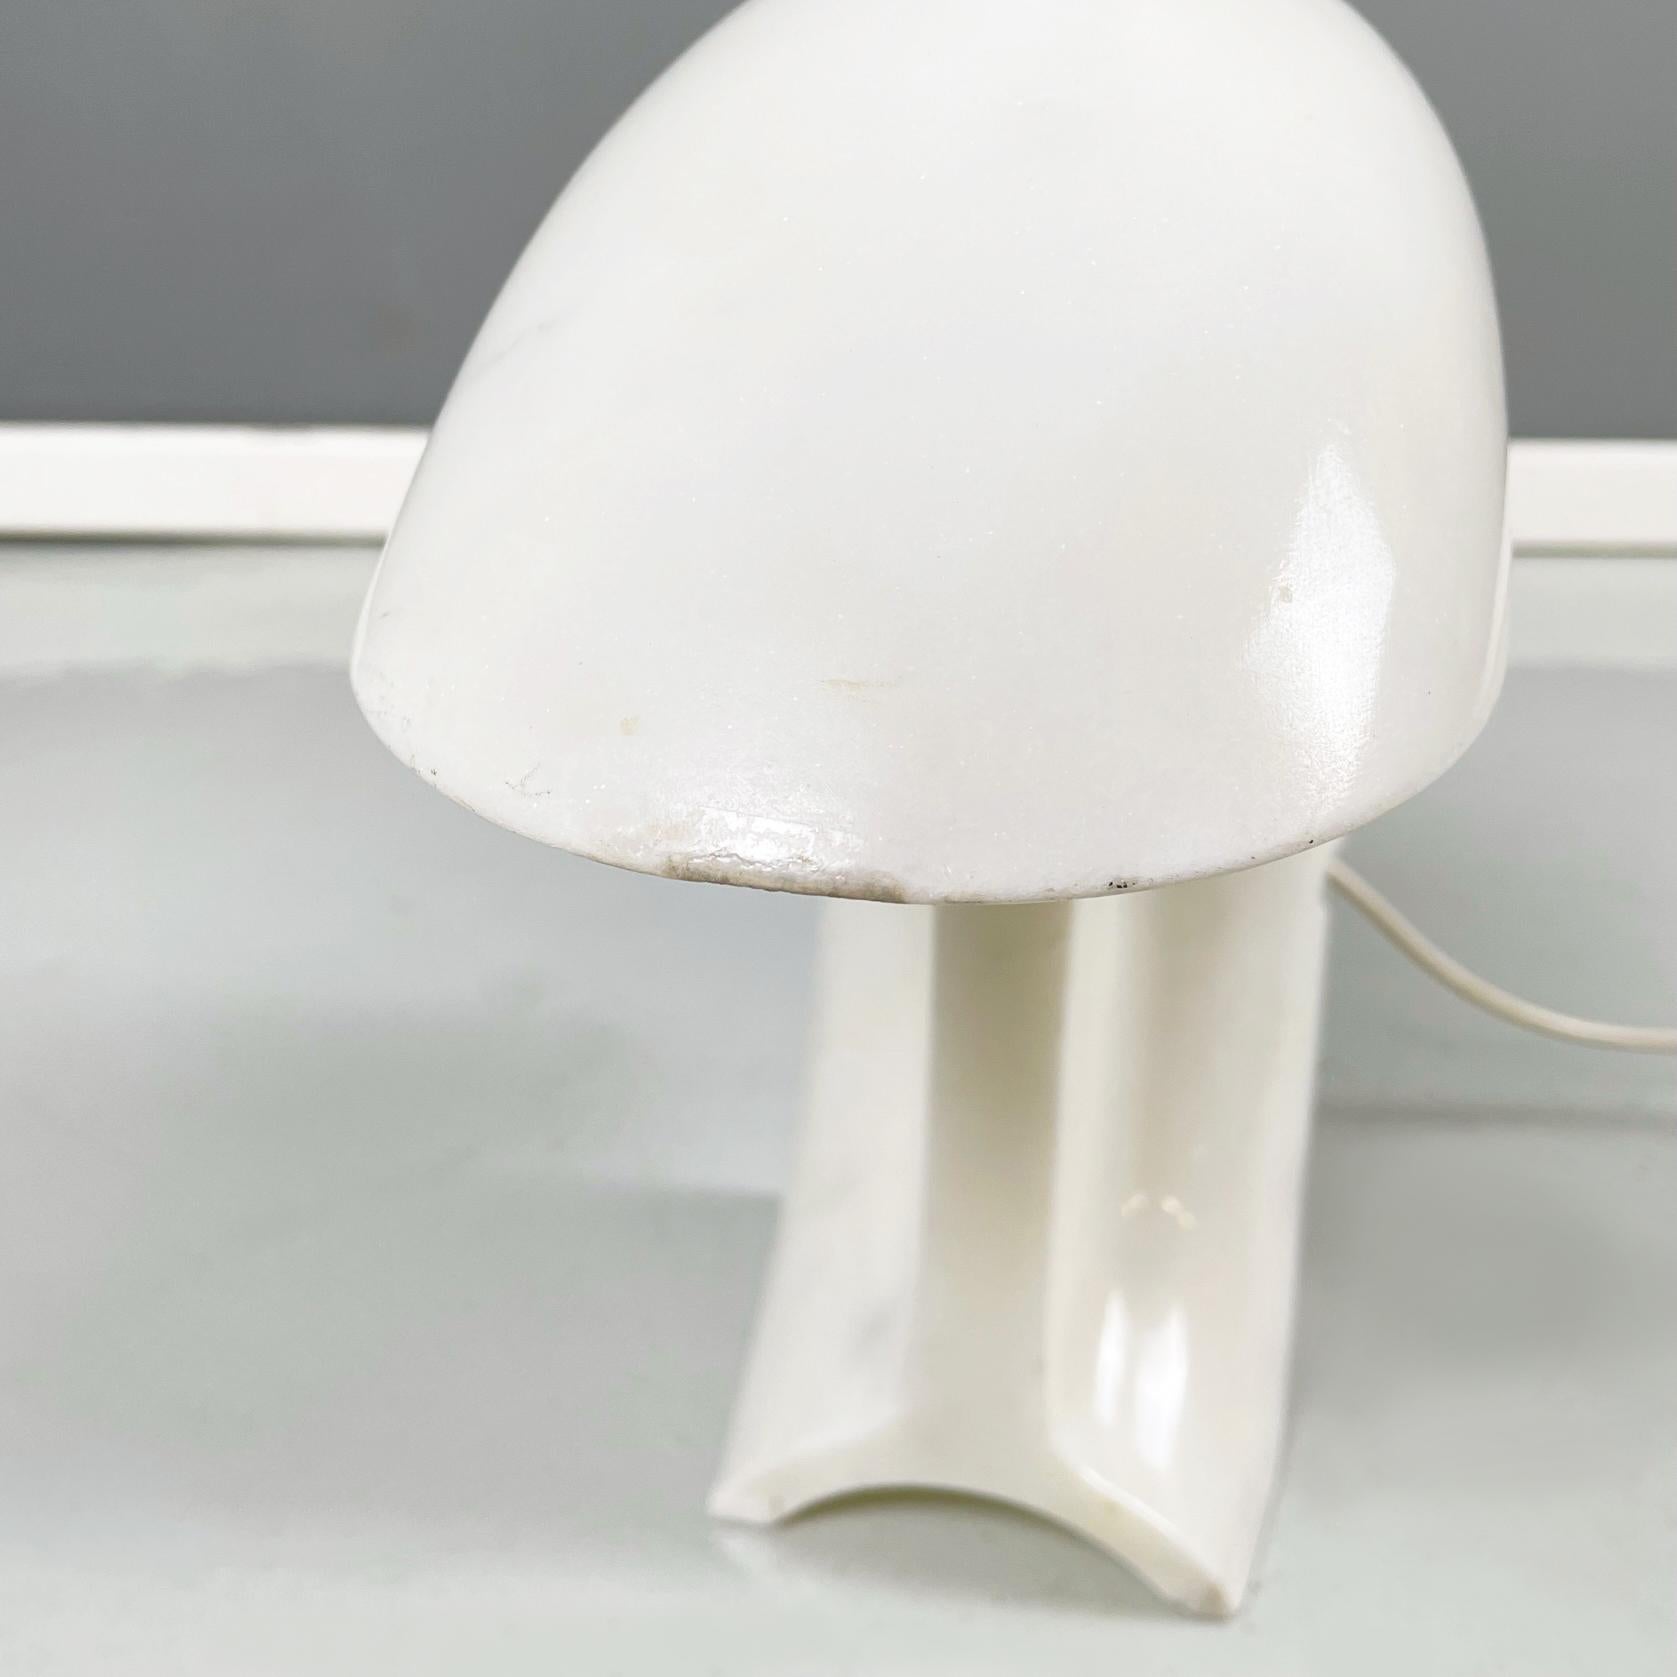 Italian Modern Carrara Marble Table Lamp Biagio by Tobia Scarpa for Flos, 1970s For Sale 5